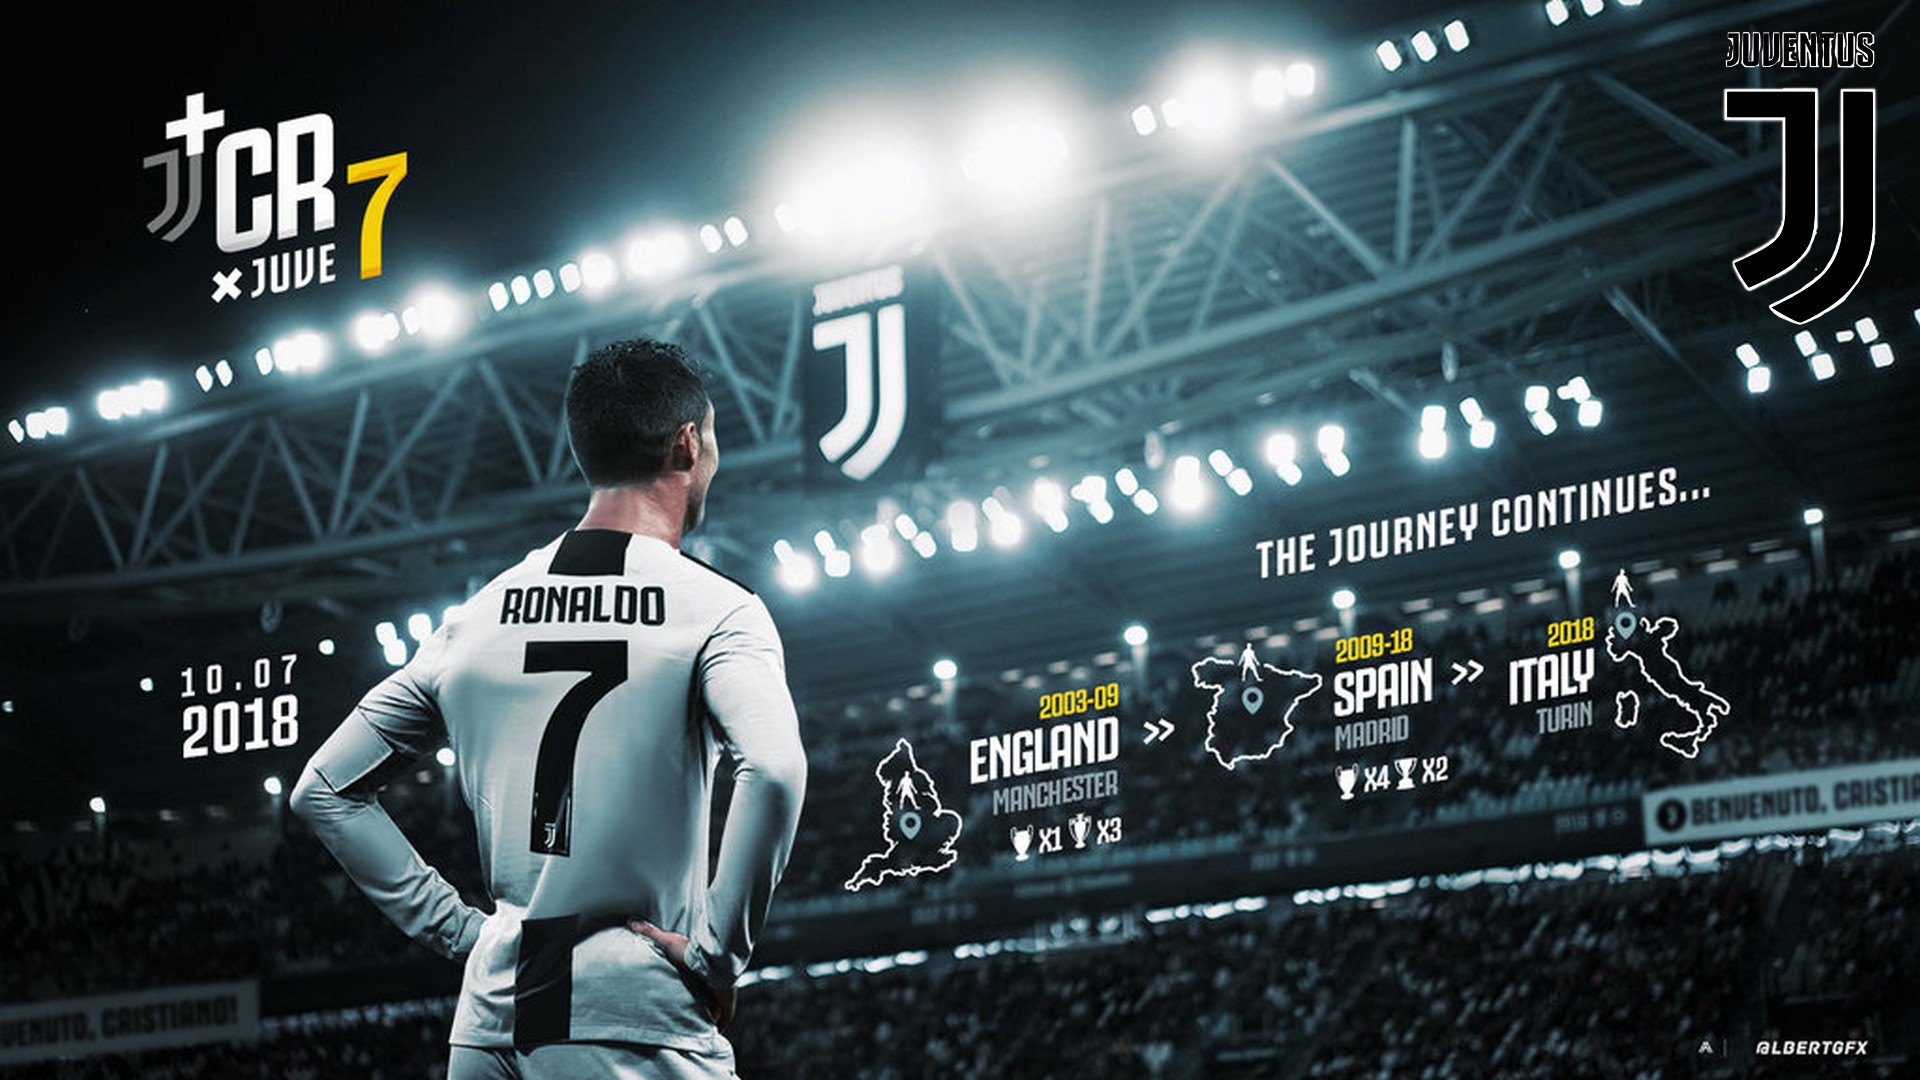 Ronaldo Juventus Wallpaper With Resolution 1920X1080 pixel. You can make this wallpaper for your Mac or Windows Desktop Background, iPhone, Android or Tablet and another Smartphone device for free